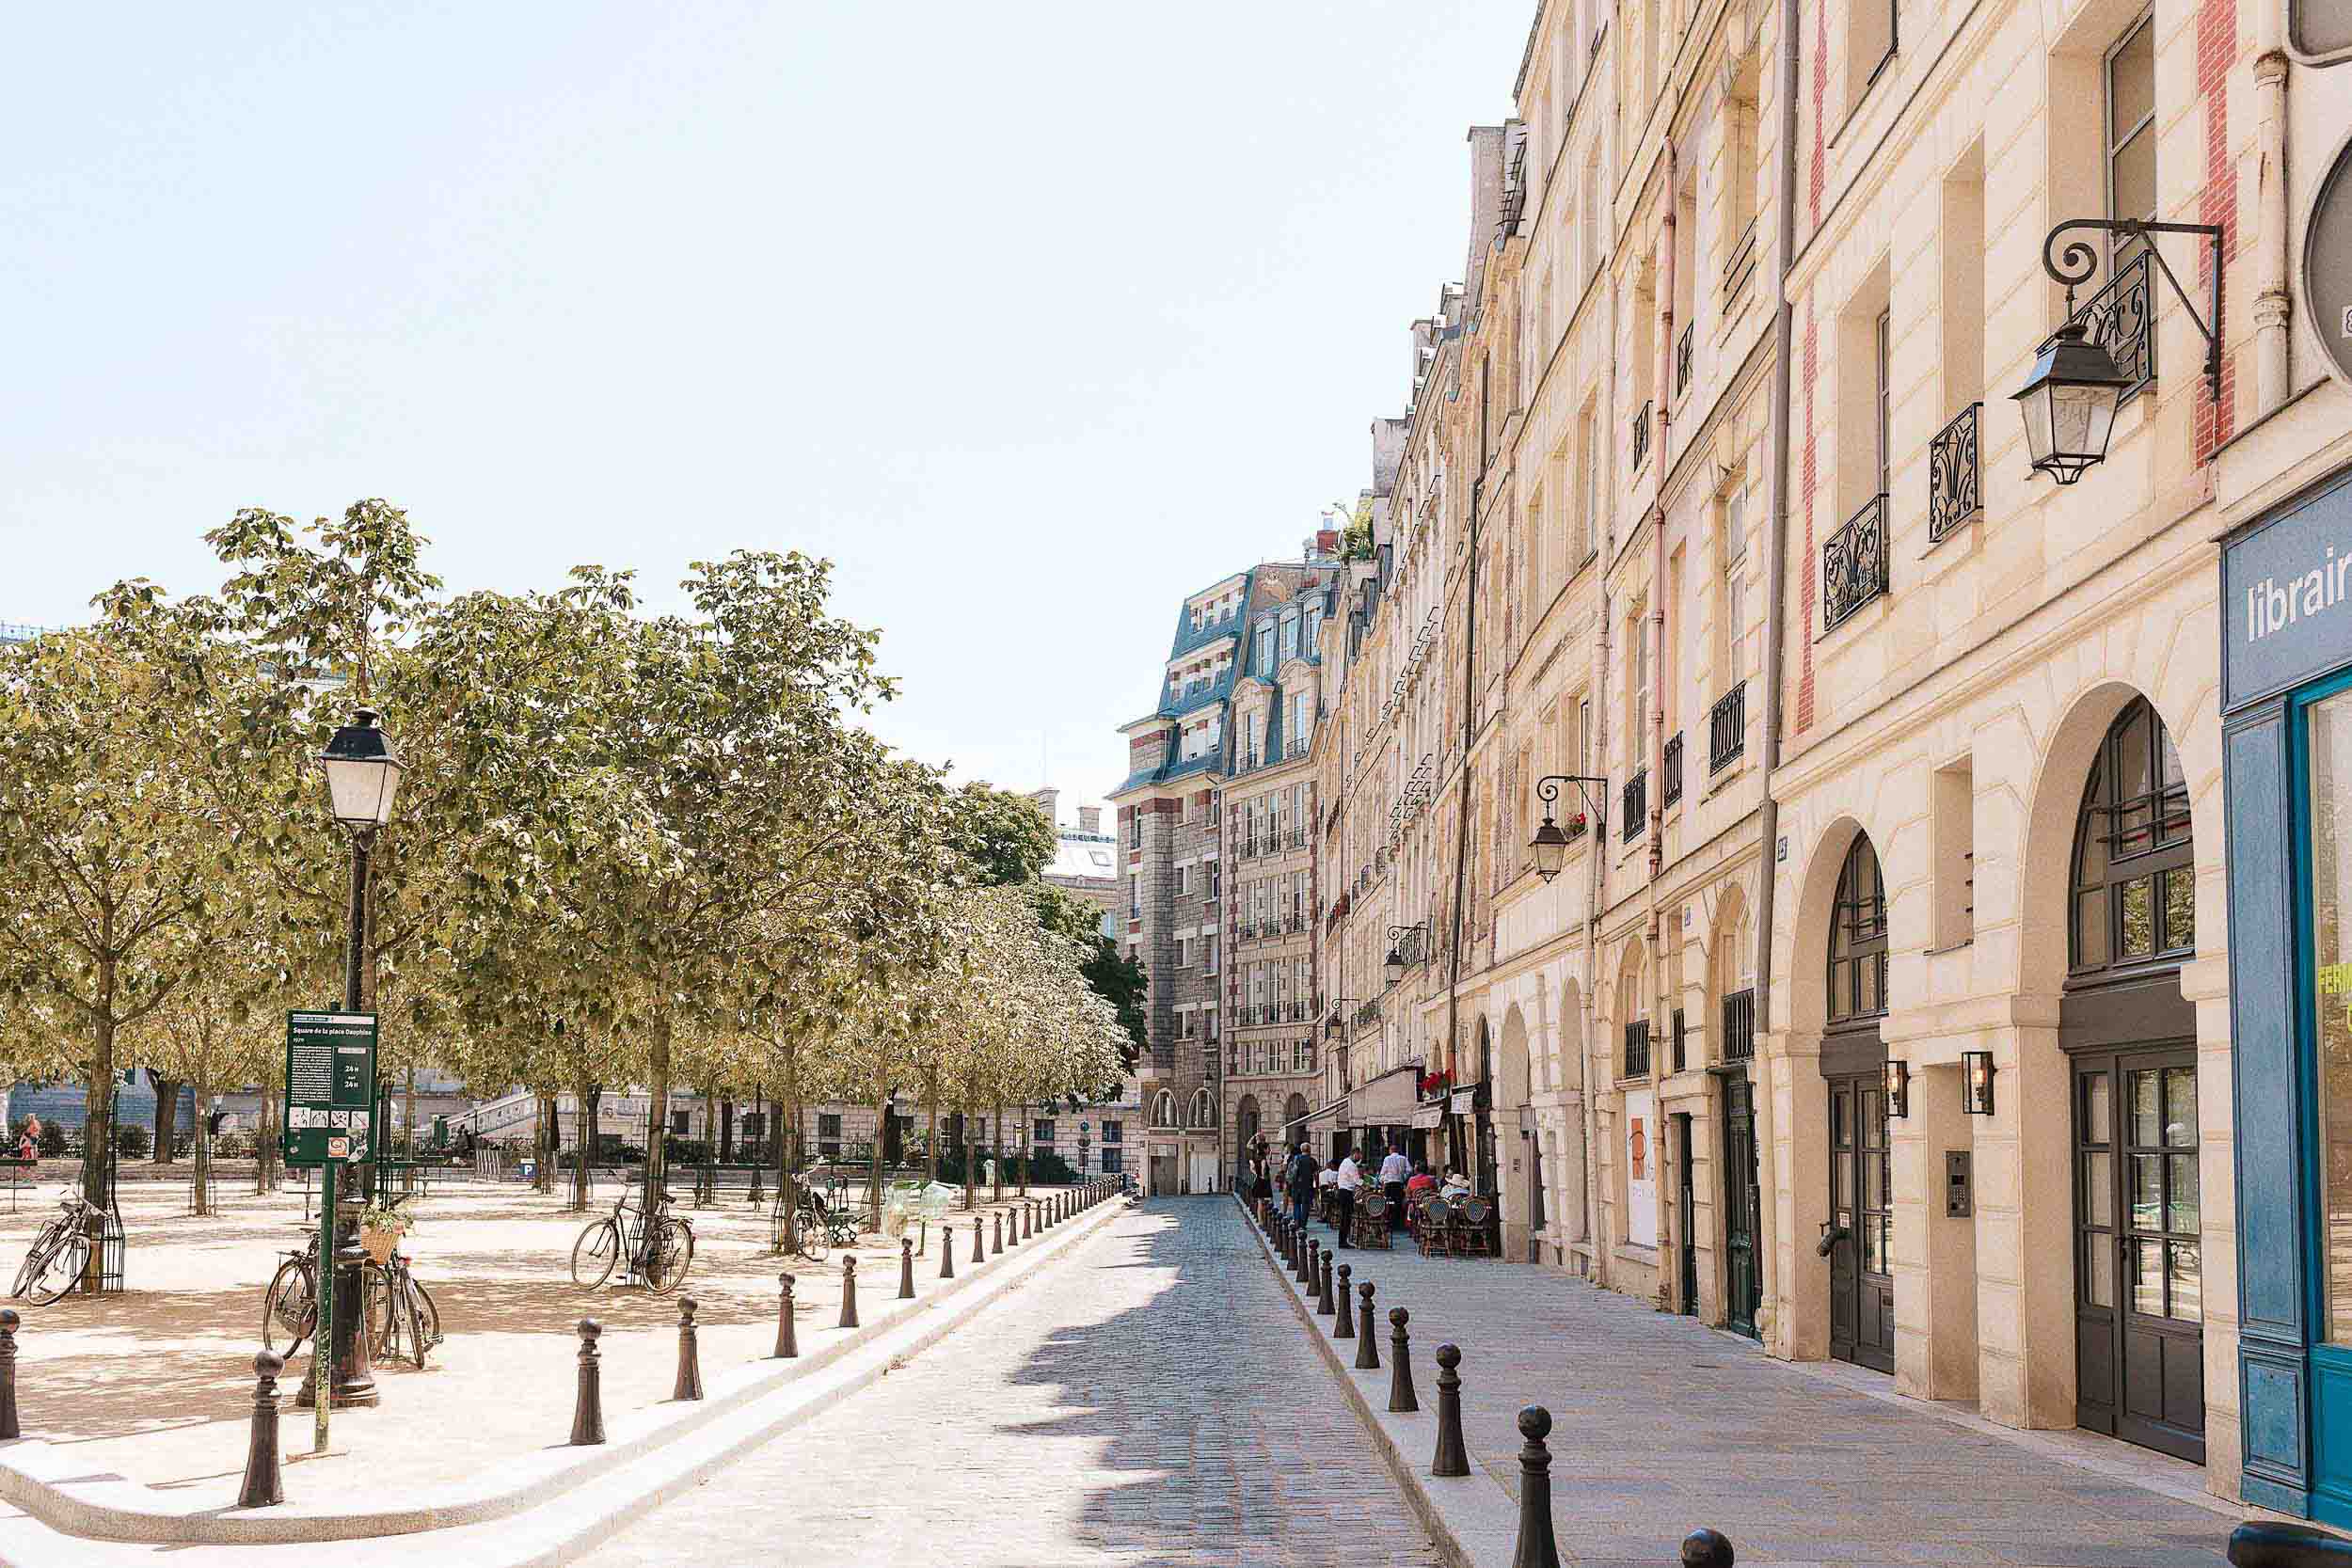 Place Dauphine, a place you must visit if you have one week in Paris